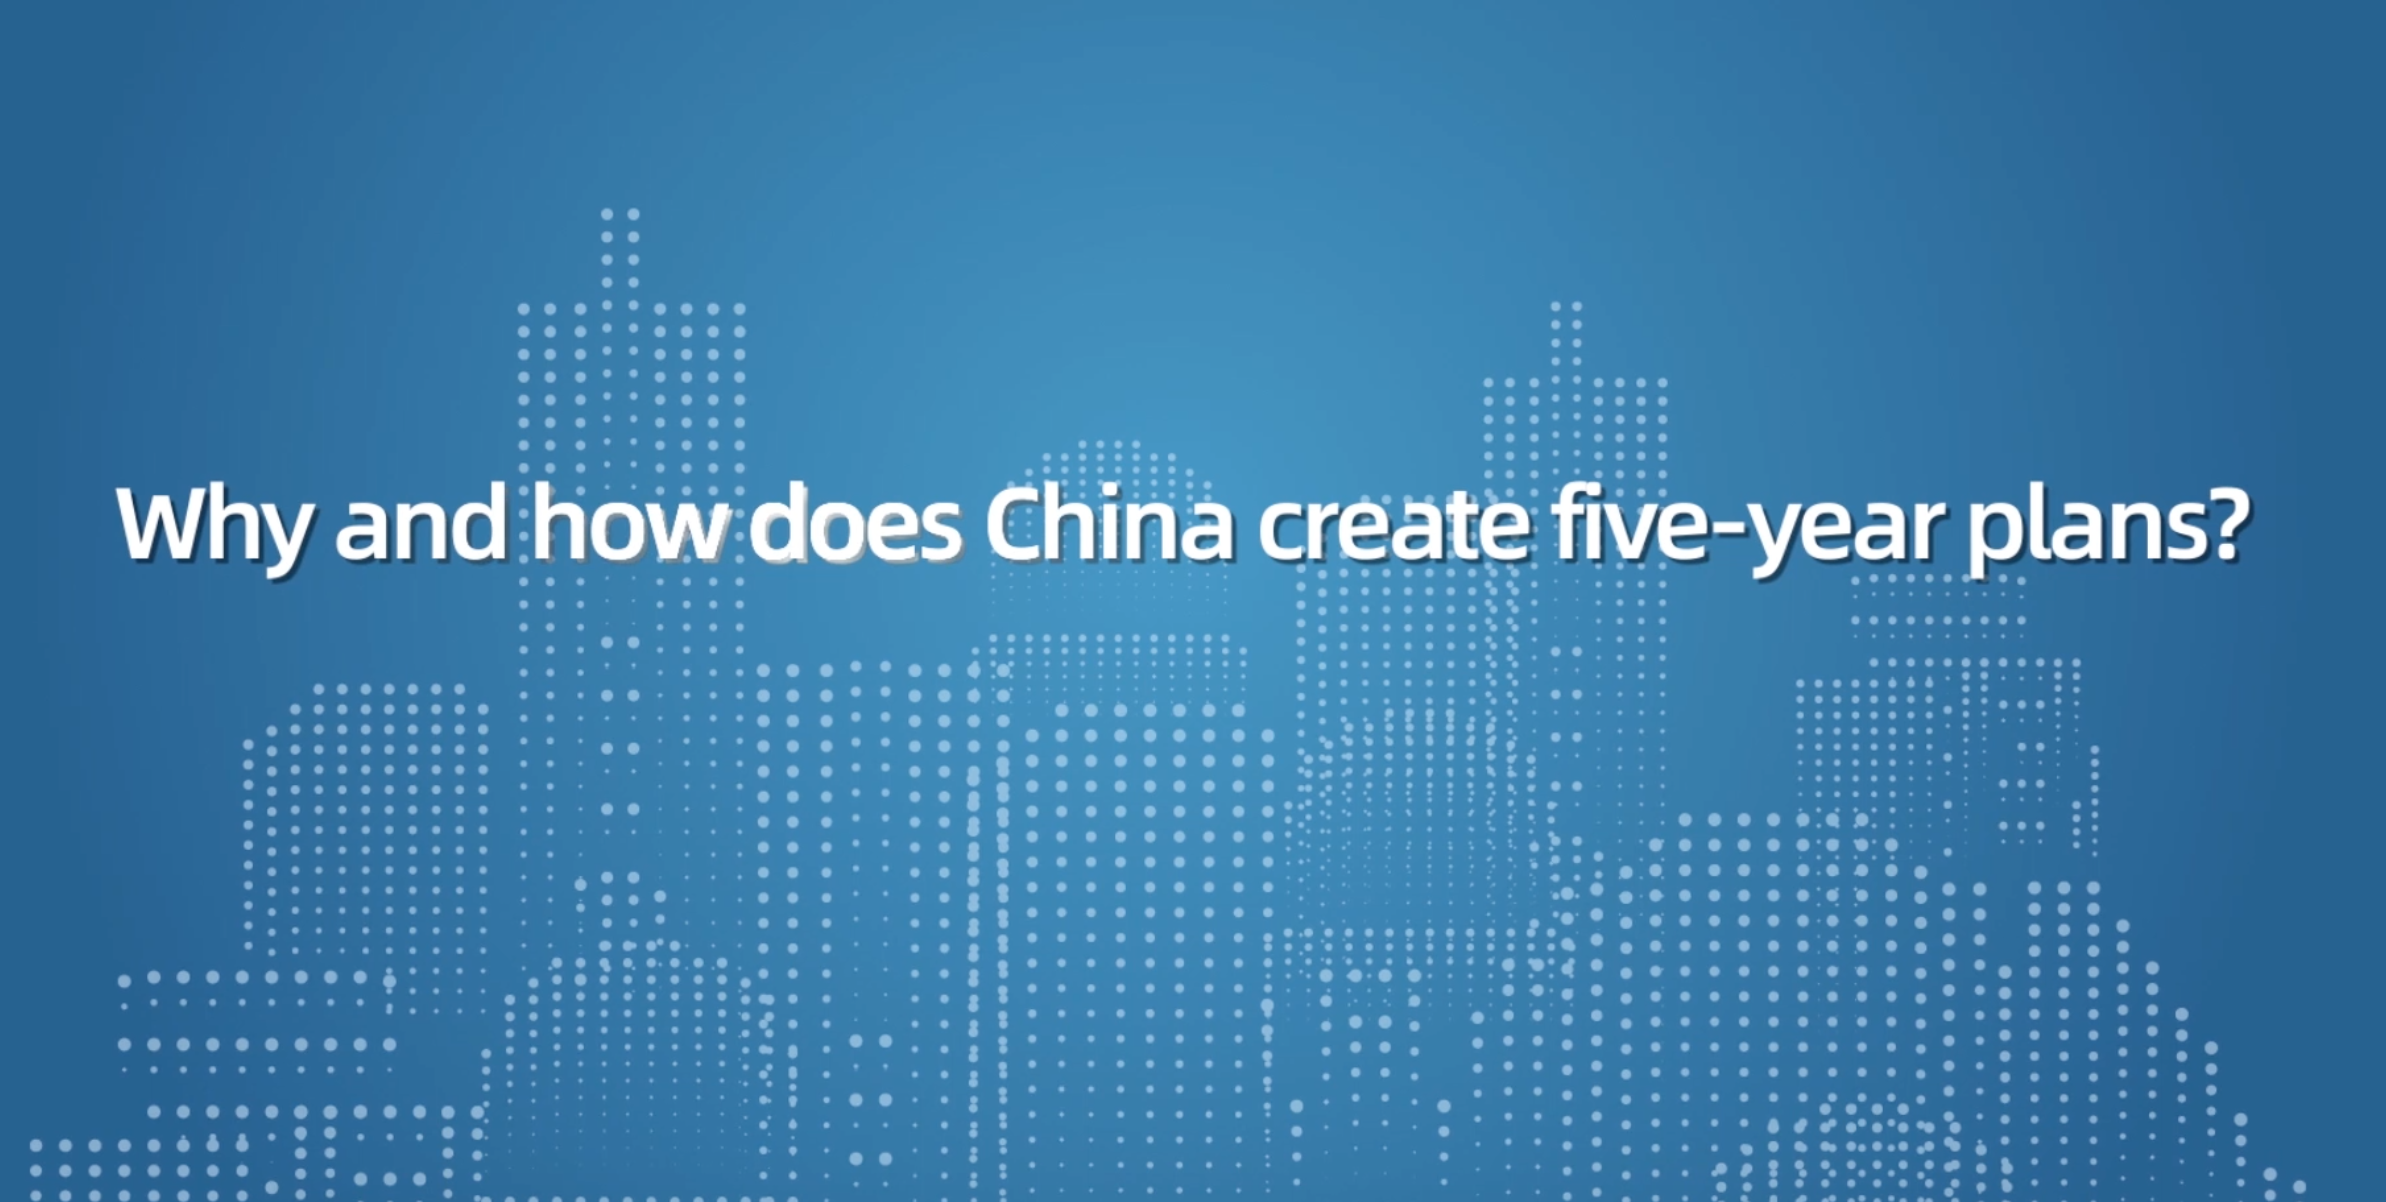 #HowChinaCan: Why and how does China create five-year plans?